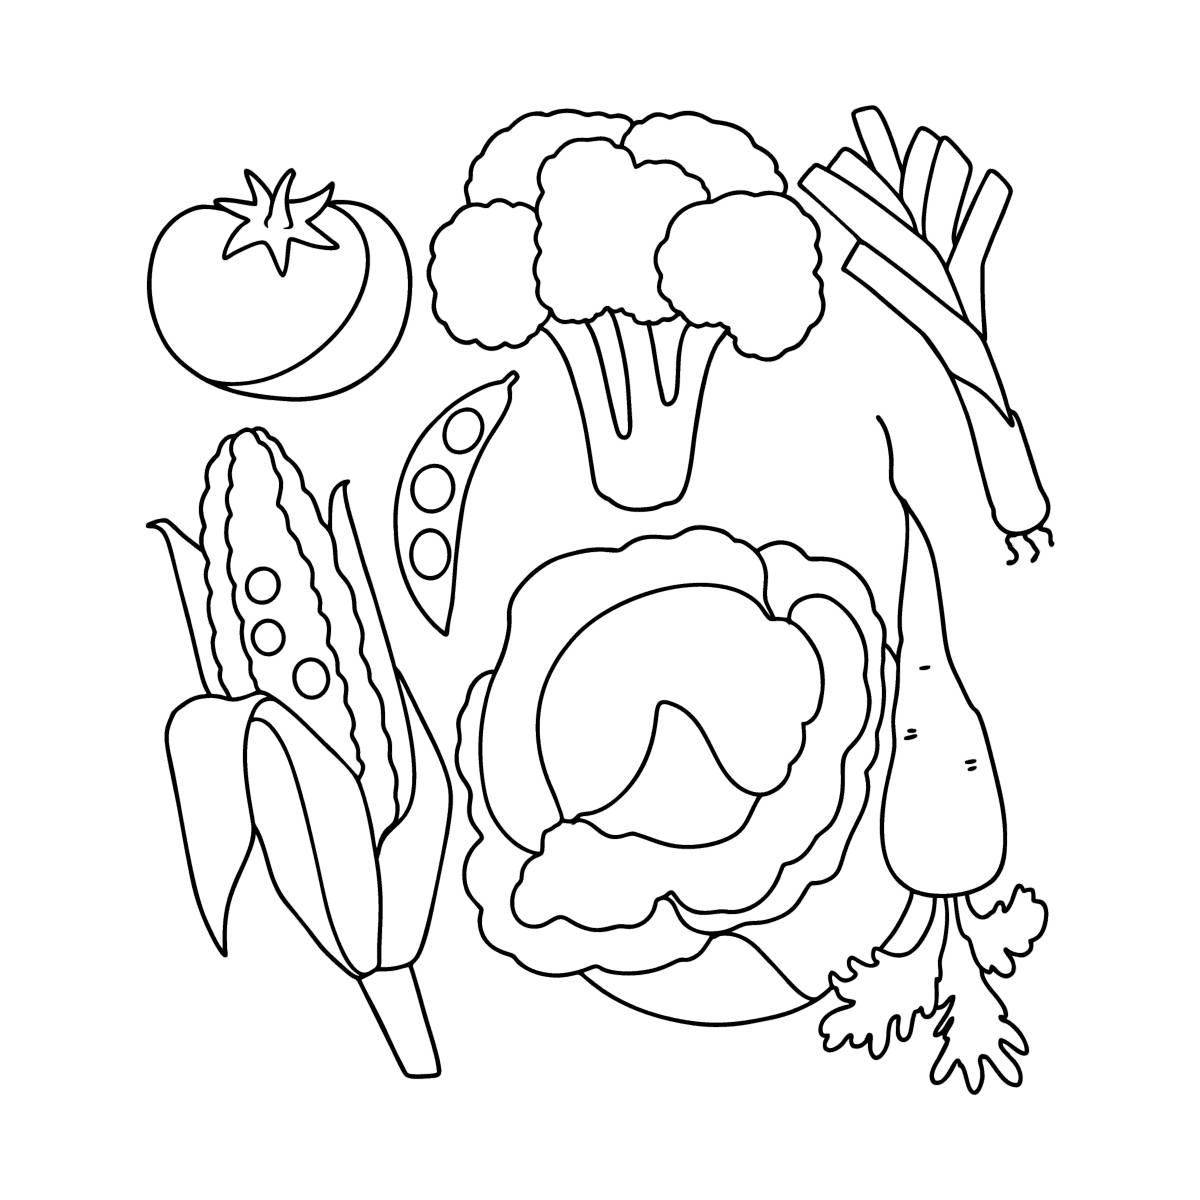 Adorable vegetable coloring book for 2-3 year olds